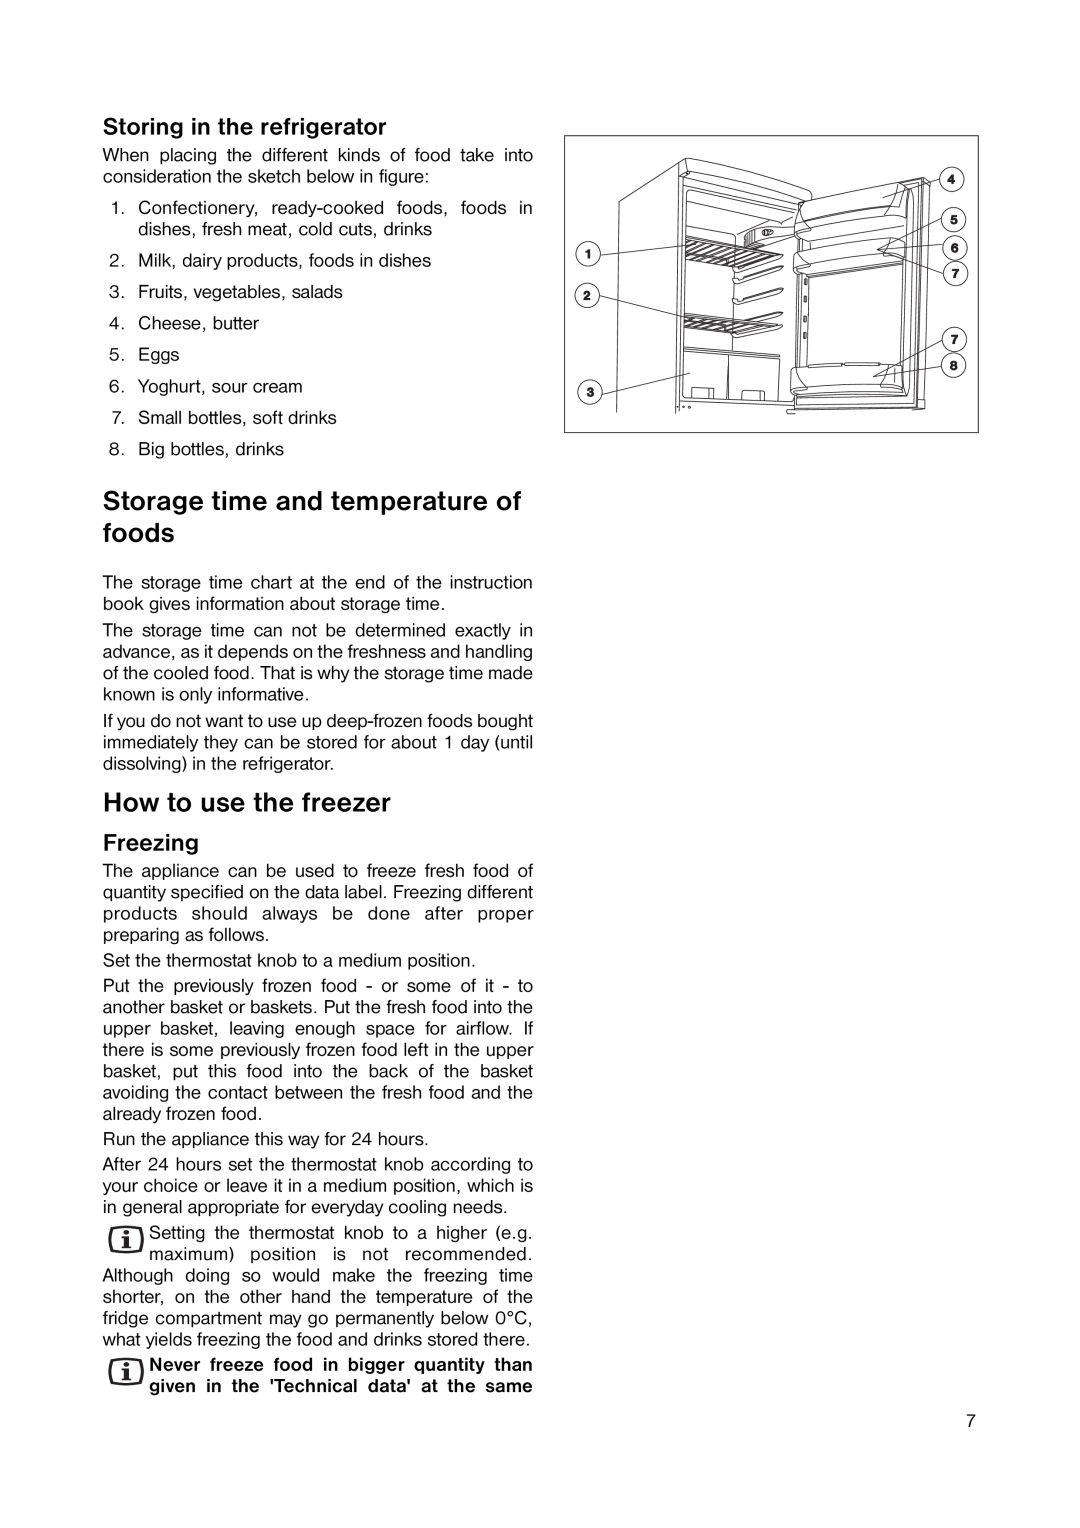 Zanussi ZRB 2941 Storage time and temperature of foods, How to use the freezer, Storing in the refrigerator, Freezing 